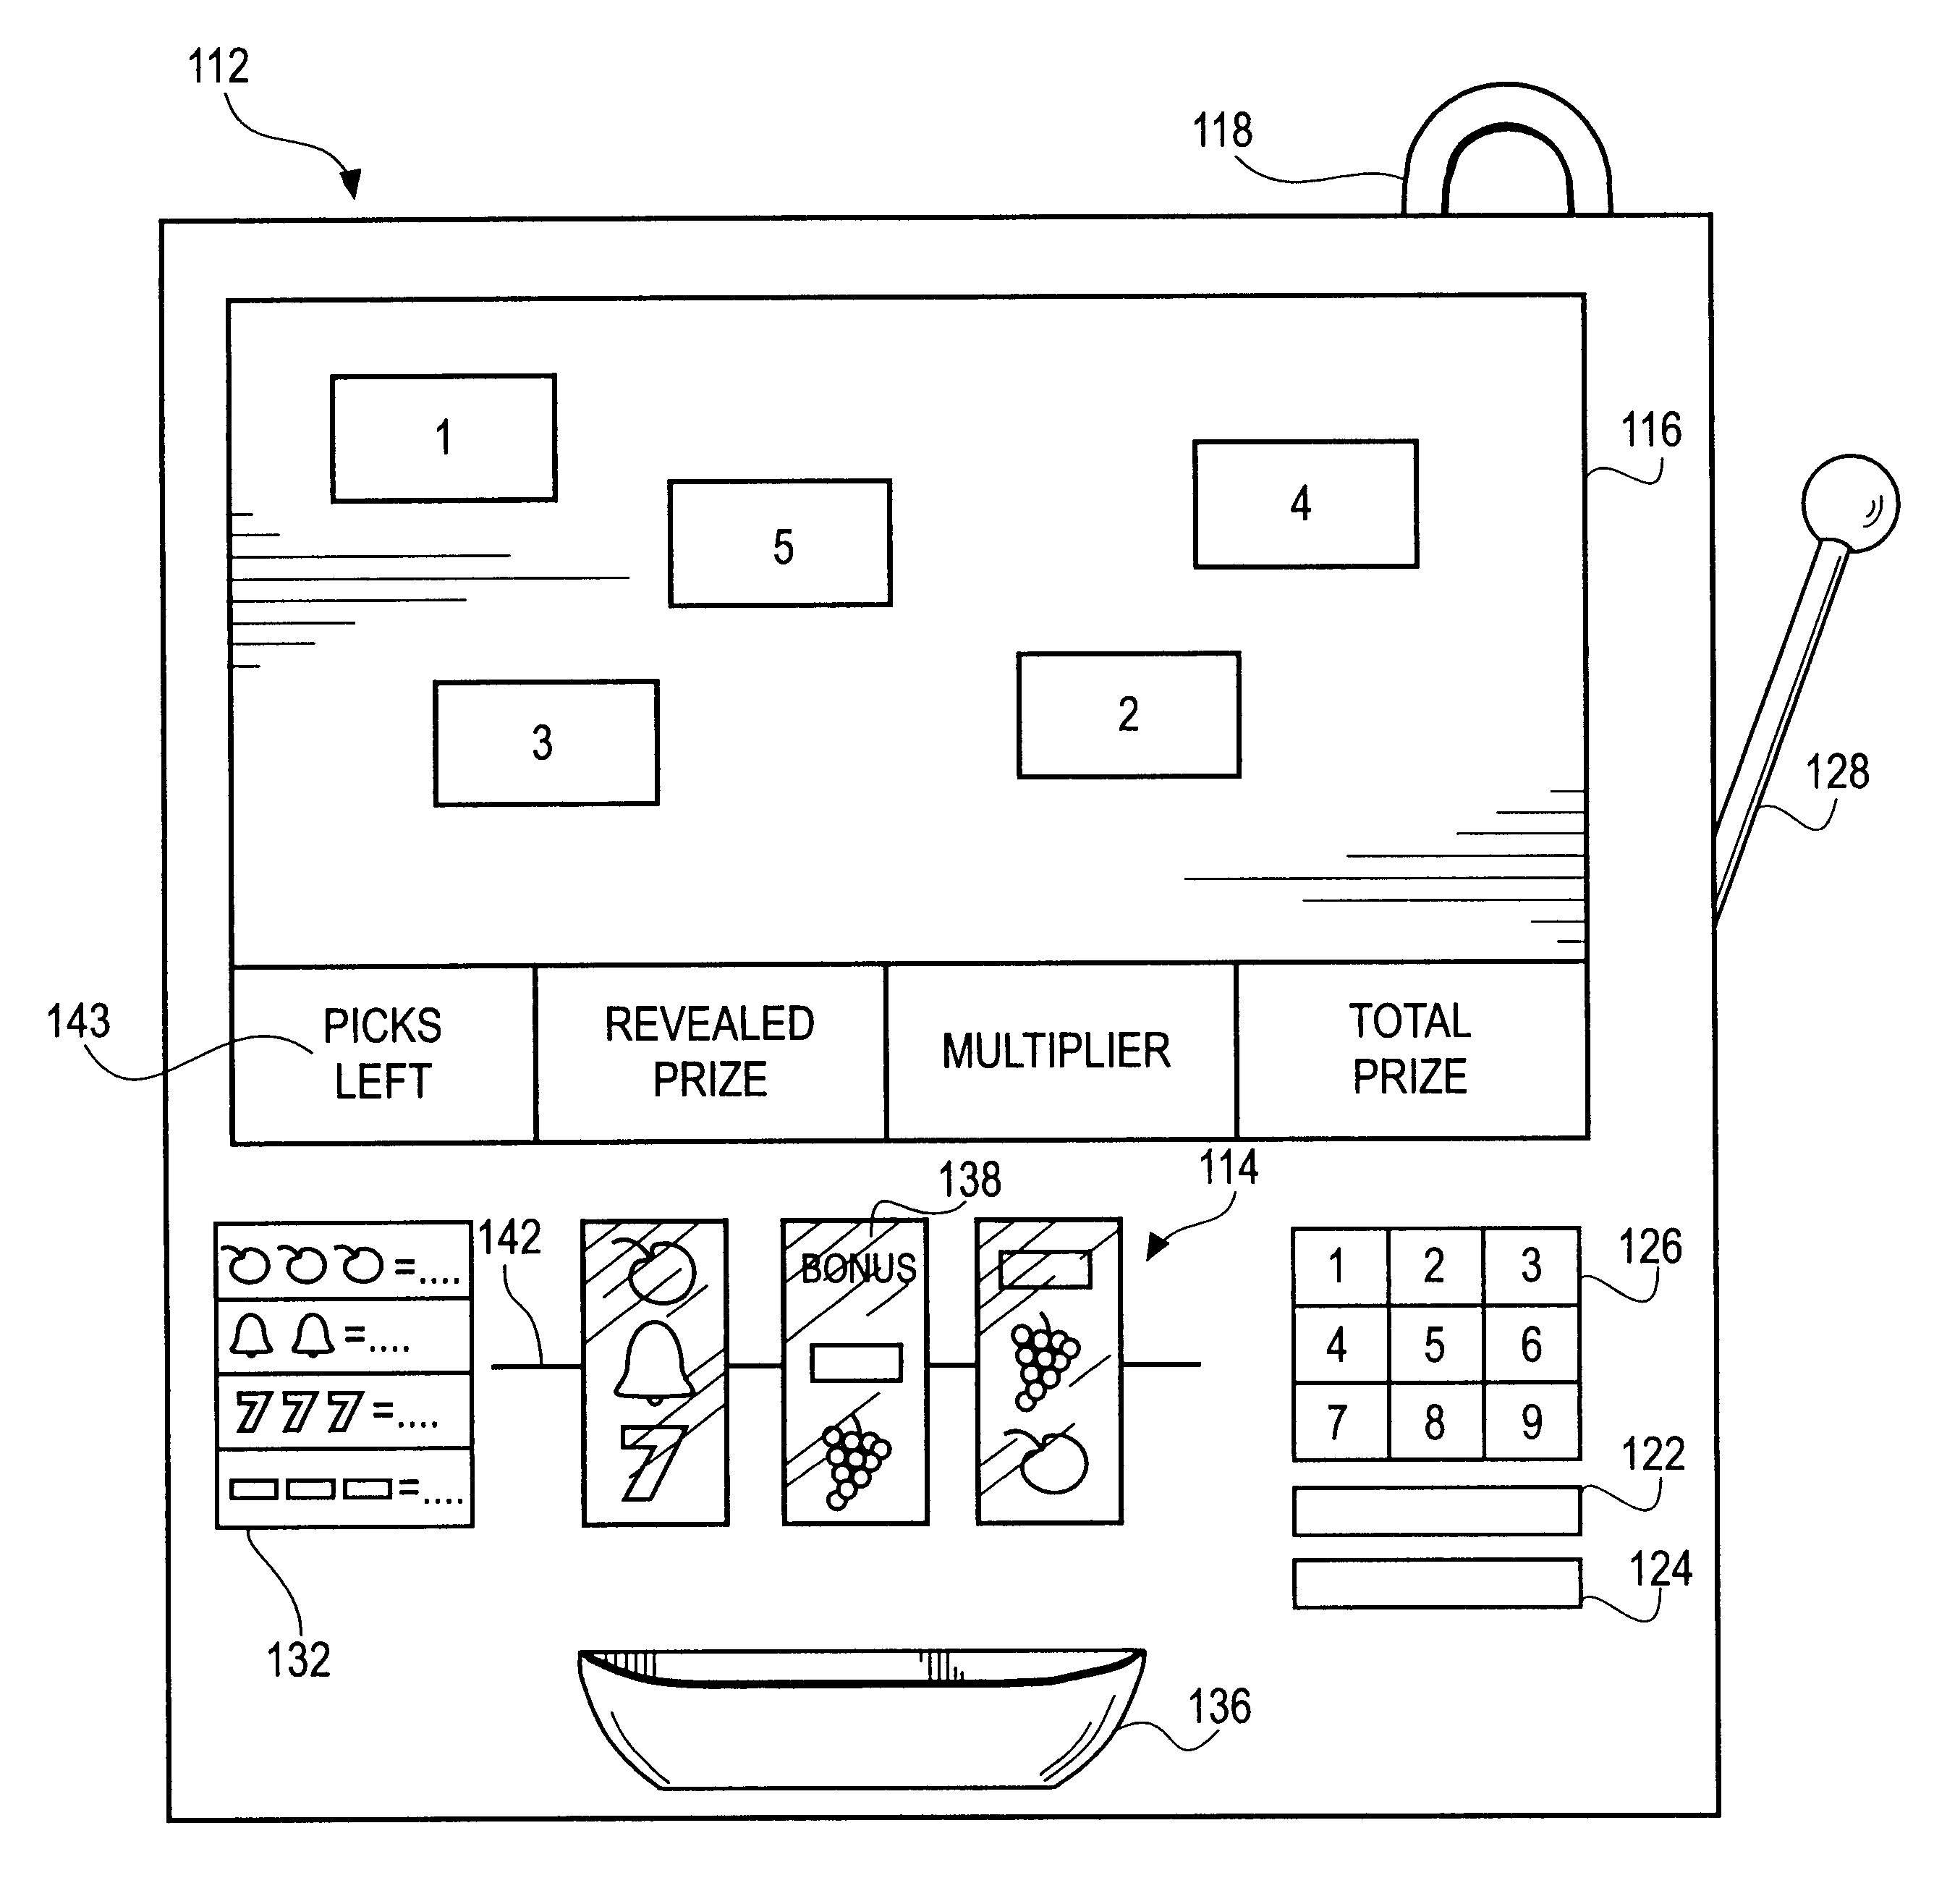 Gaming bonus apparatus and method with player interaction